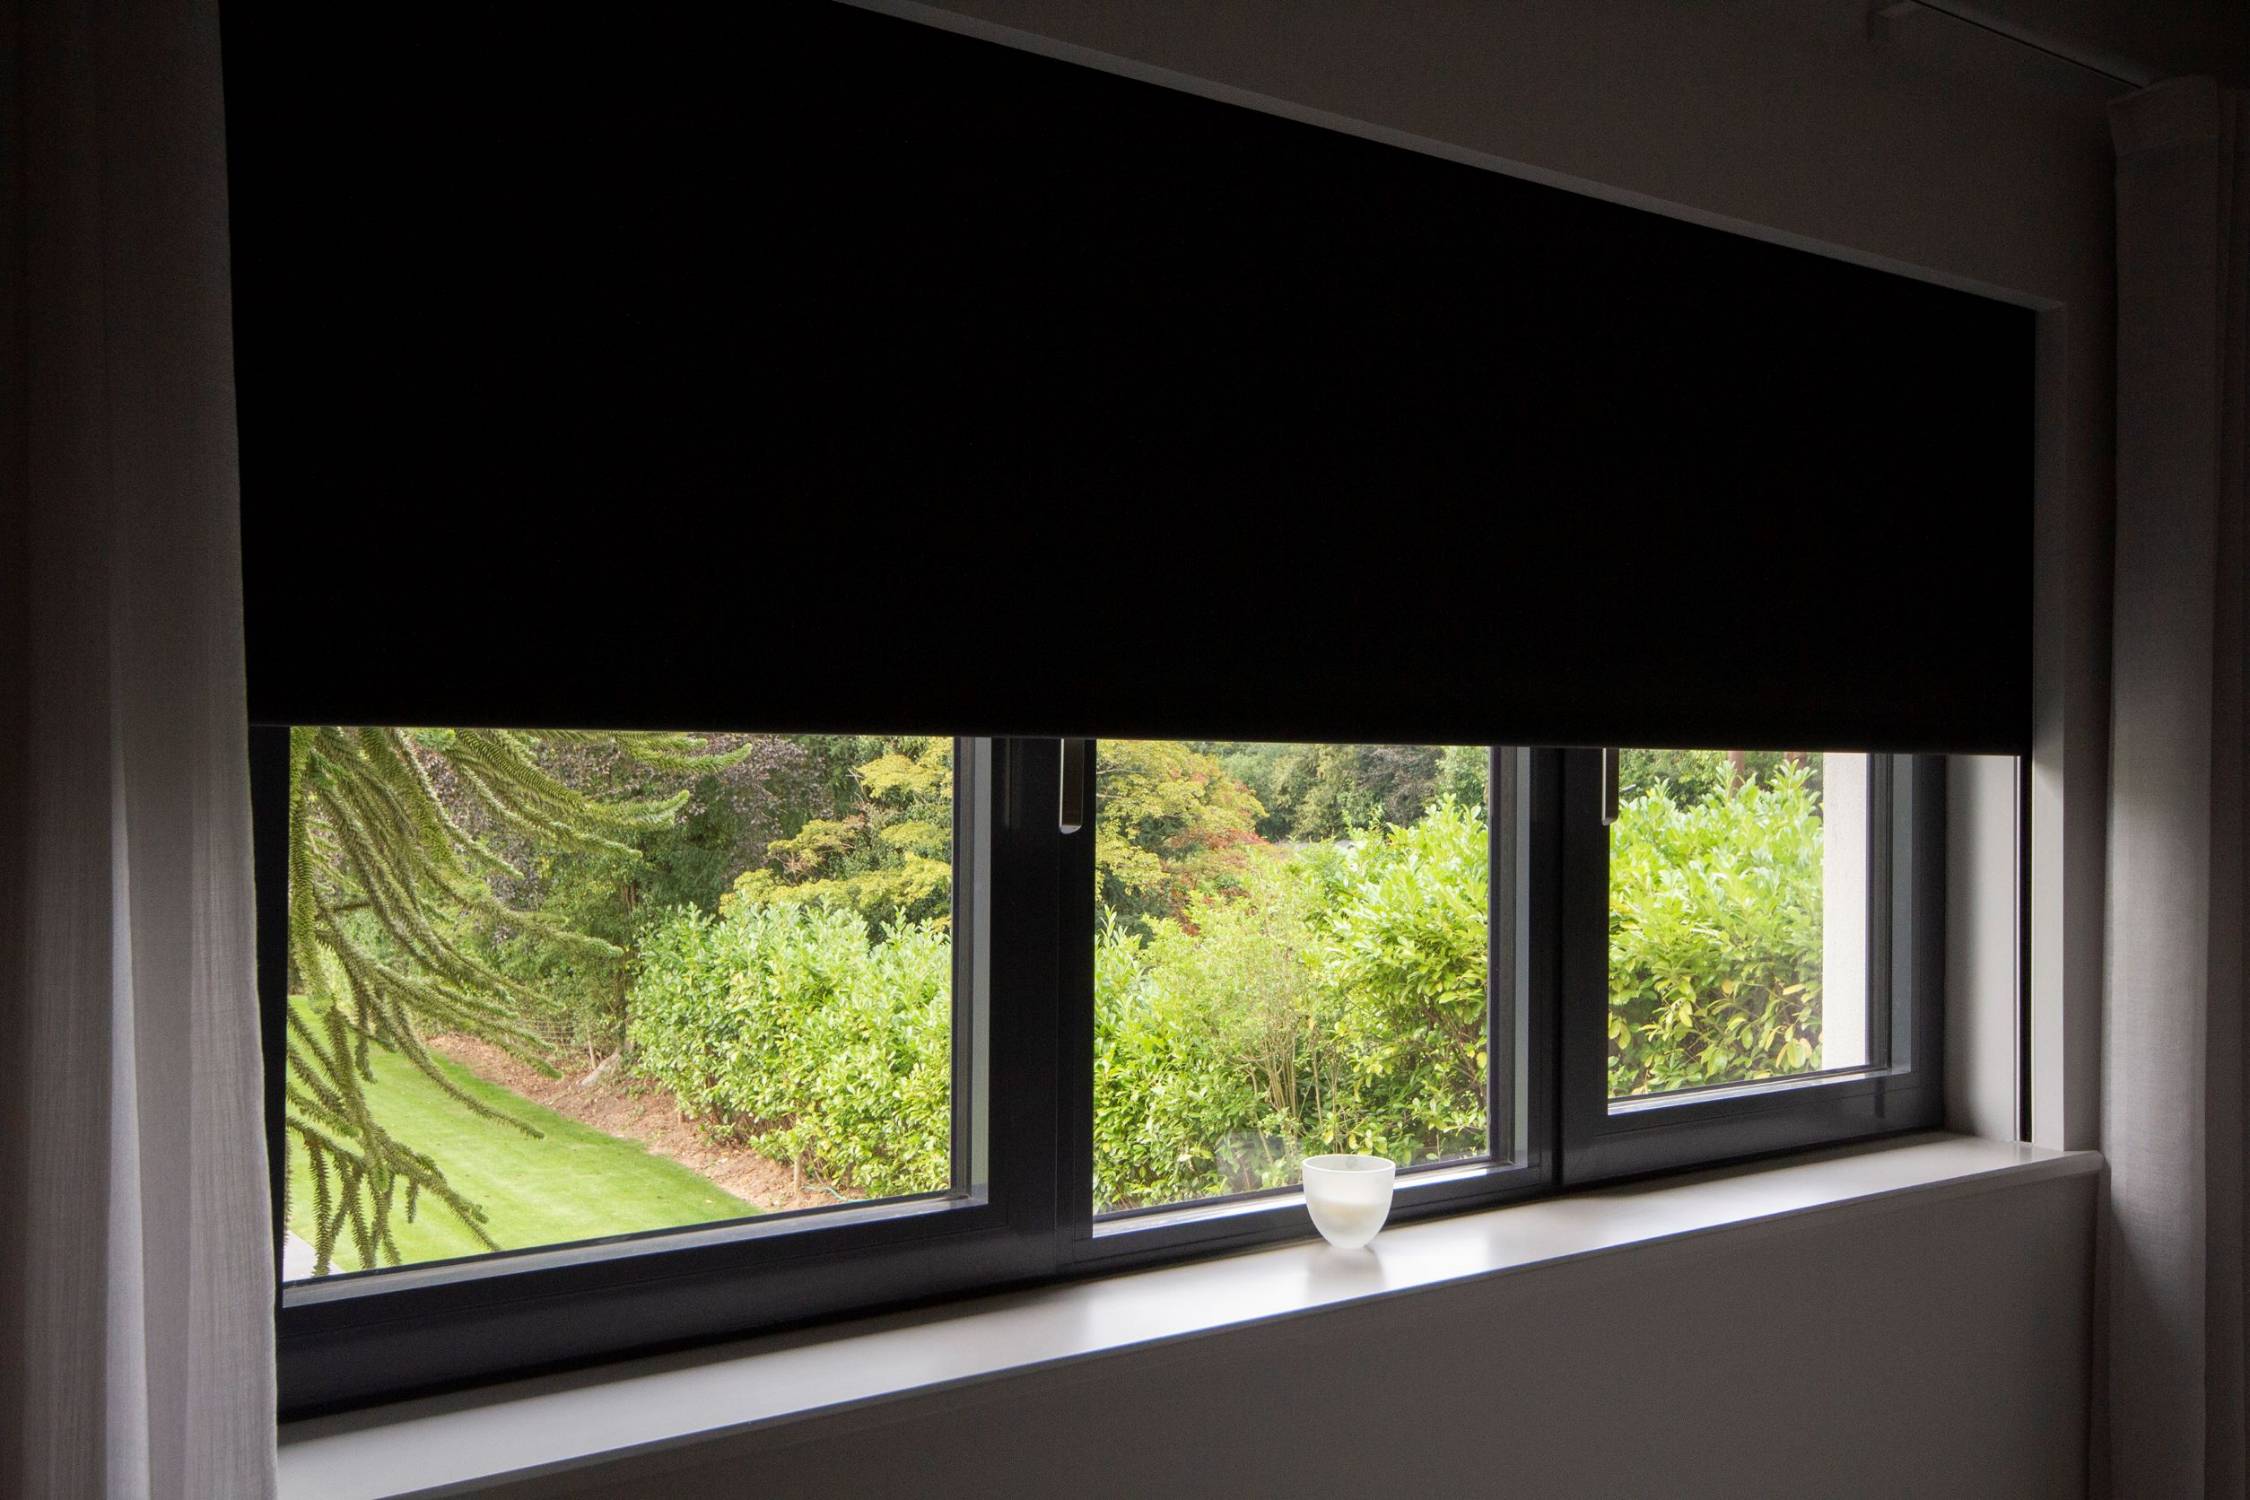 Blindspace Modular M Series to Conceal Blinds - Concealment Box for Blinds